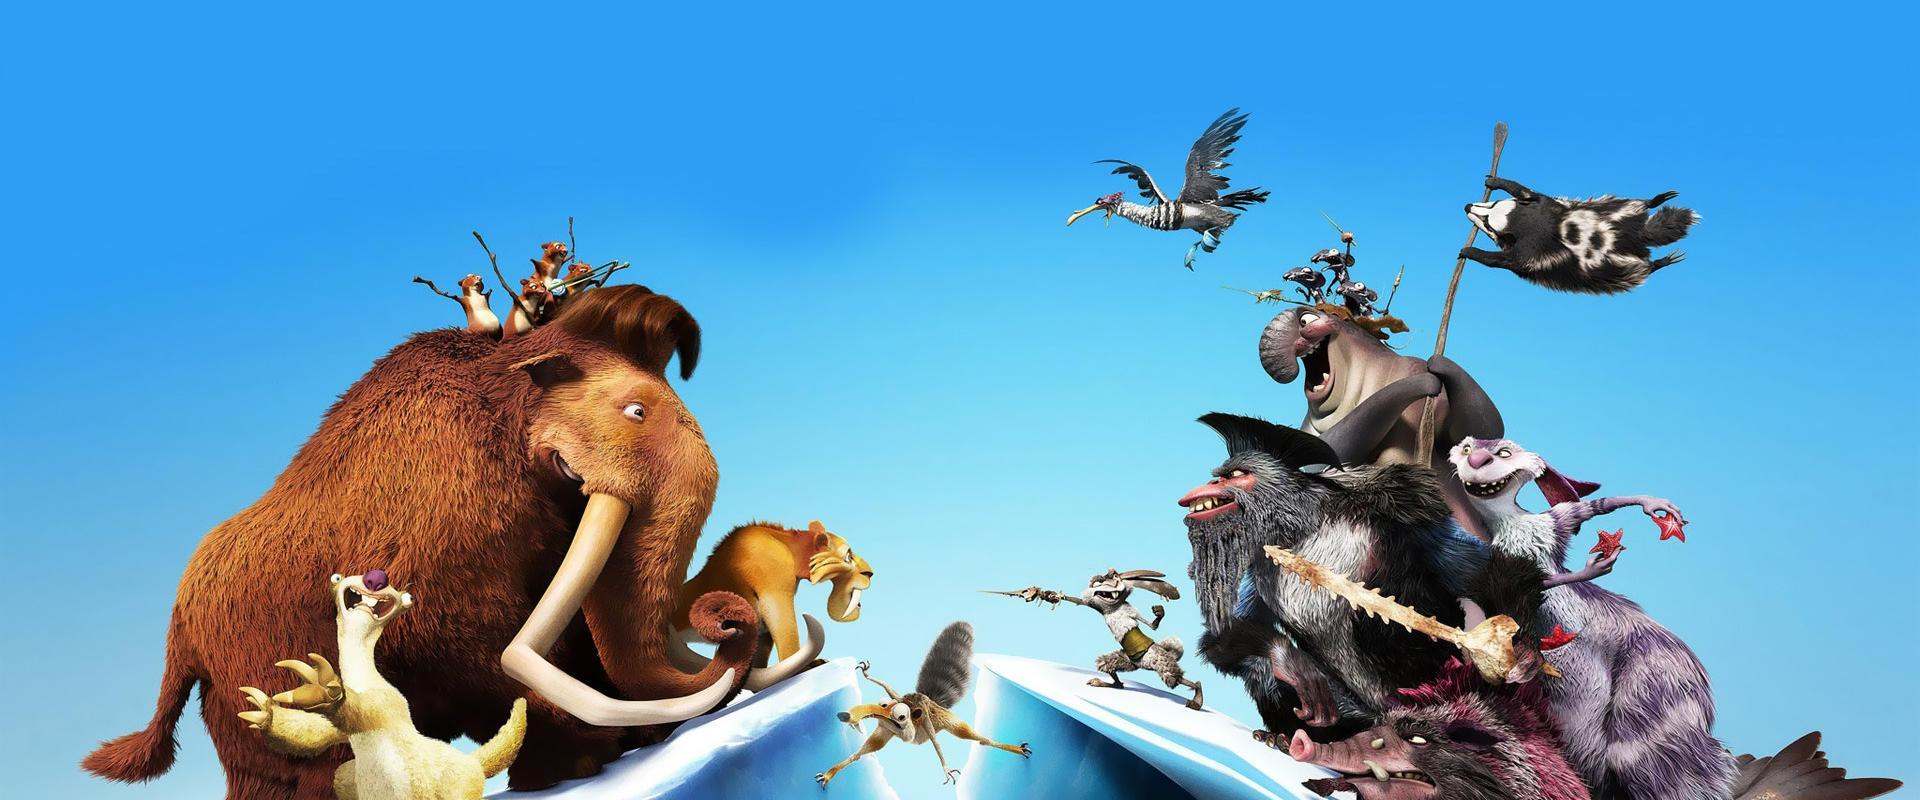 Ice Age: Continental Drift background 2